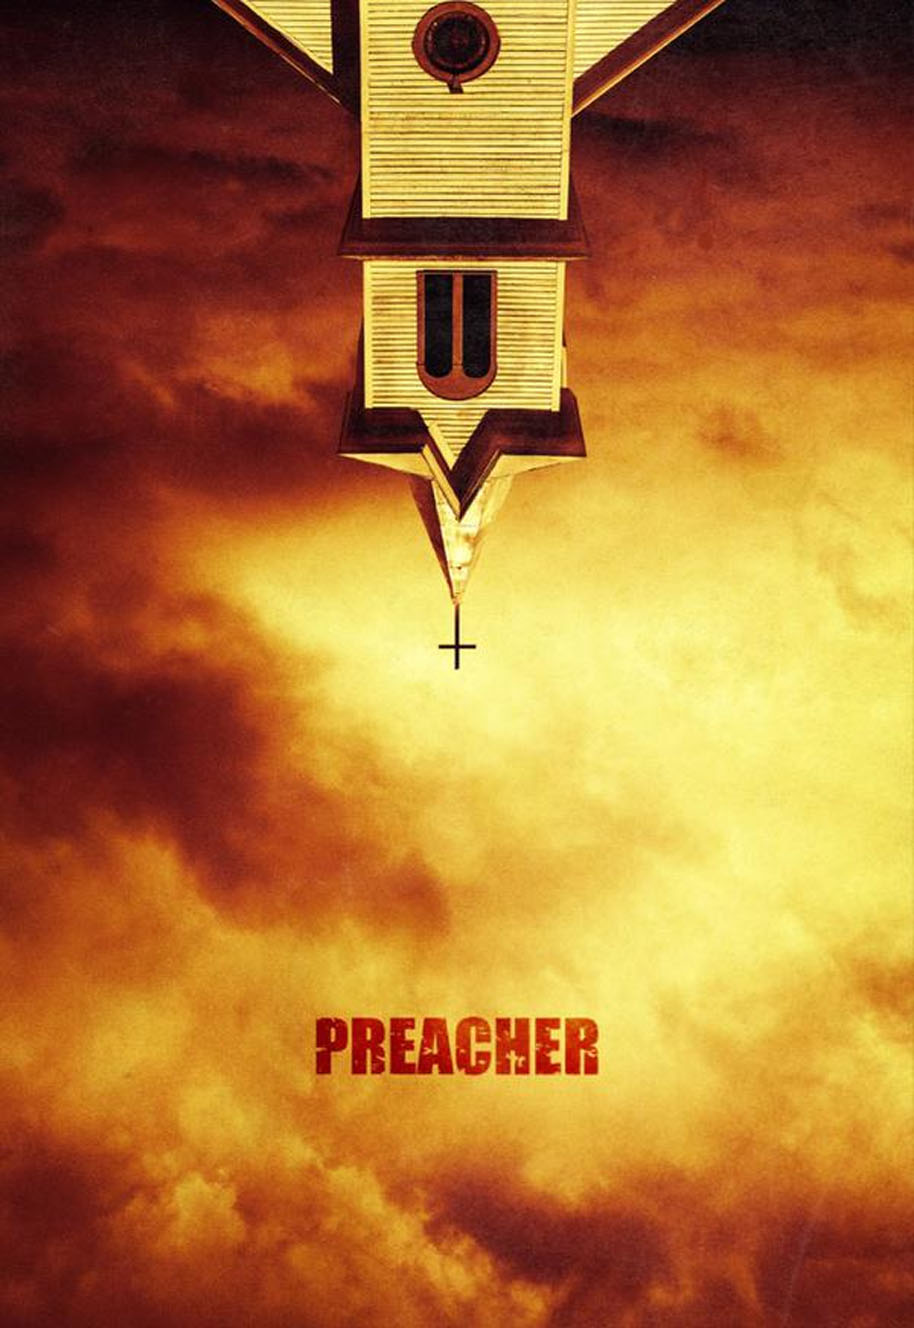 Amc’s preacher: is it what you’re looking for?